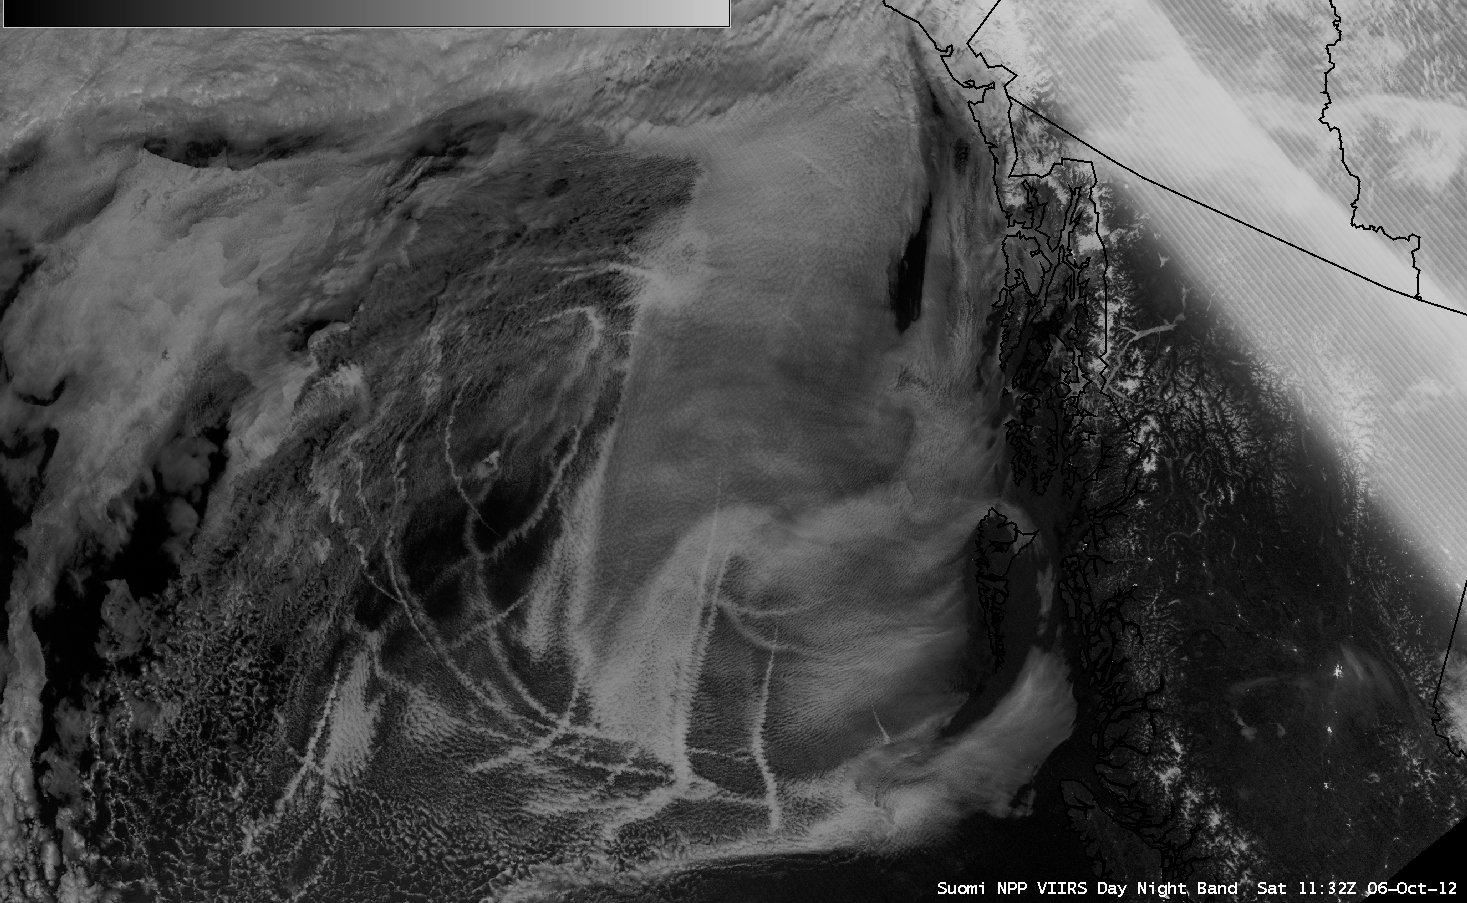 Suomi NPP VIIRS 0.7 Âµm Day/Night Band and Fog/stratus product images